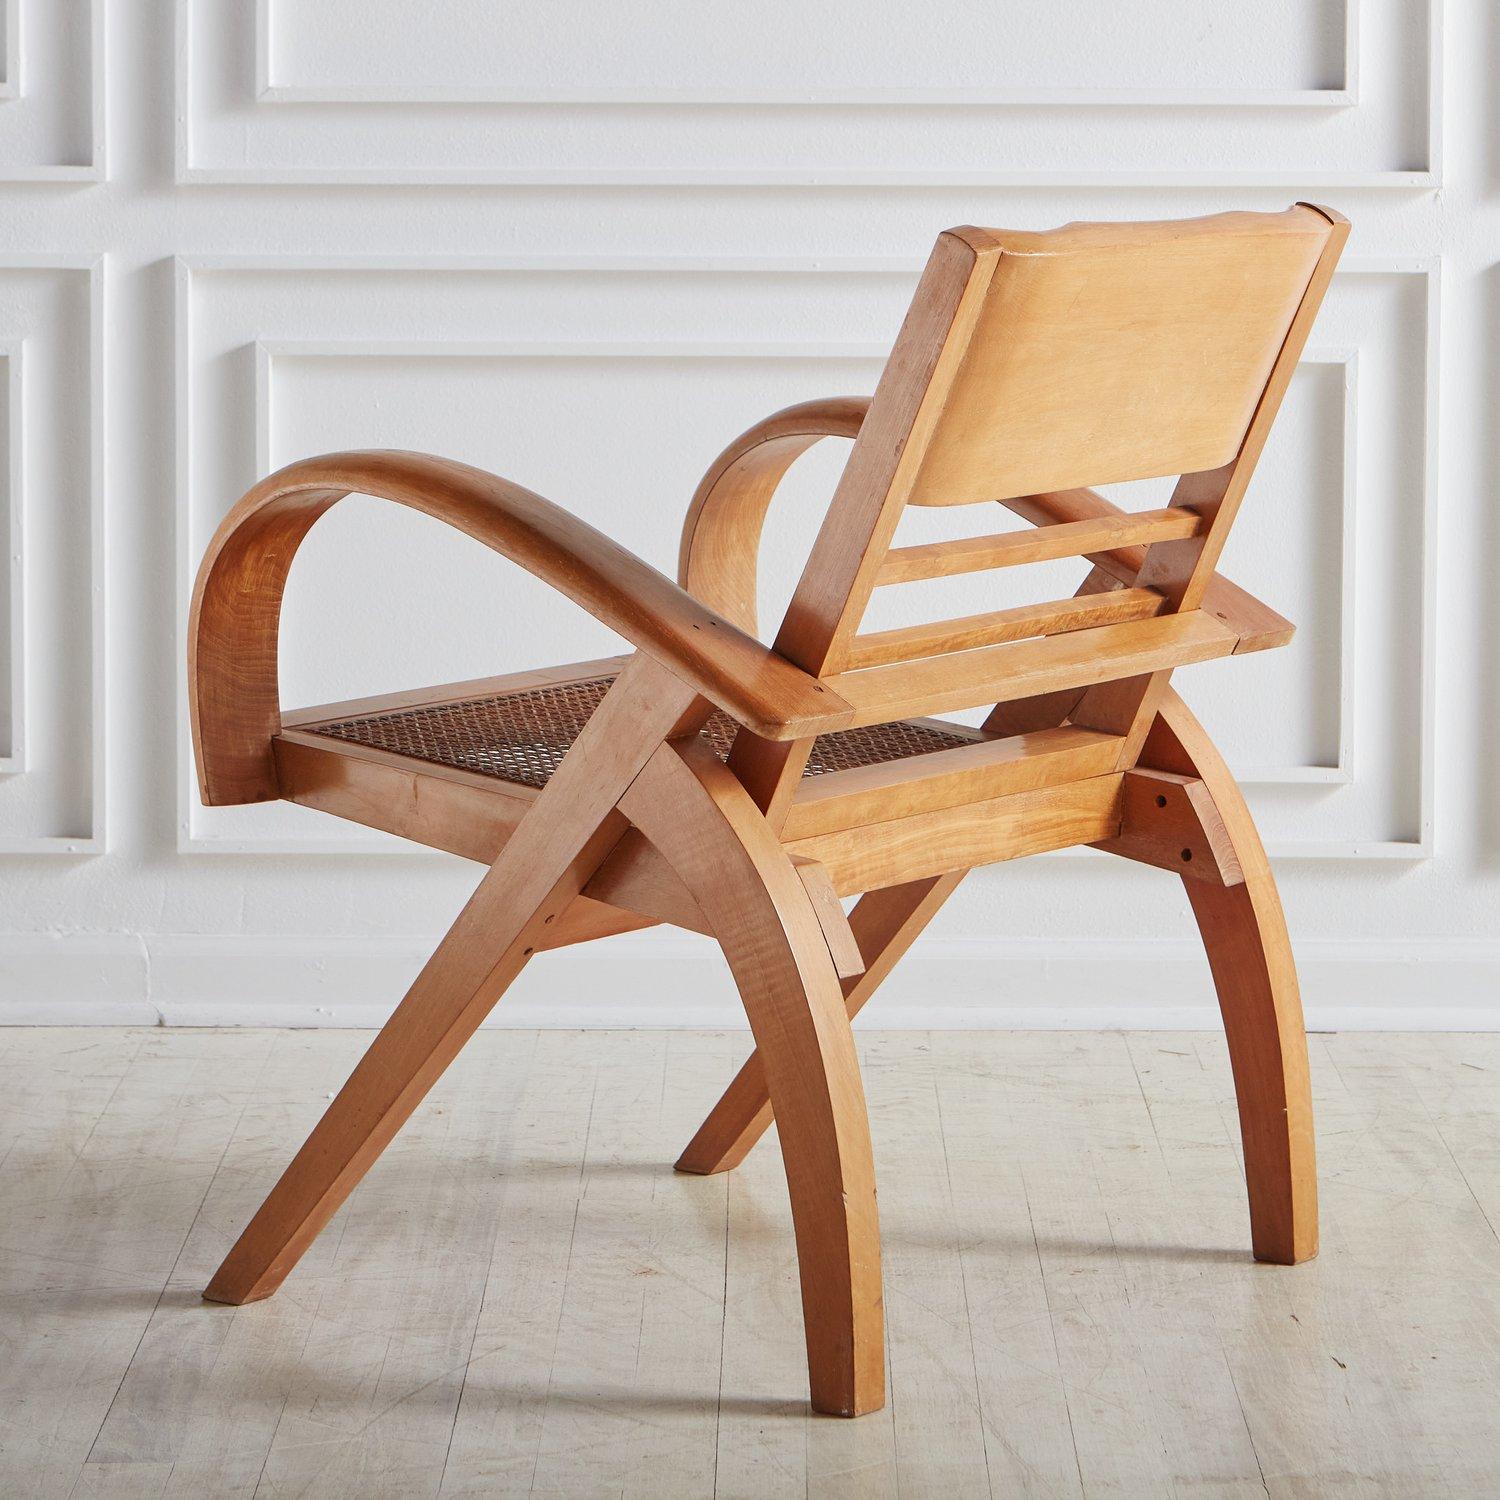 Caning Maple Wood Folding Chair with Cane Seat, France 20th Century